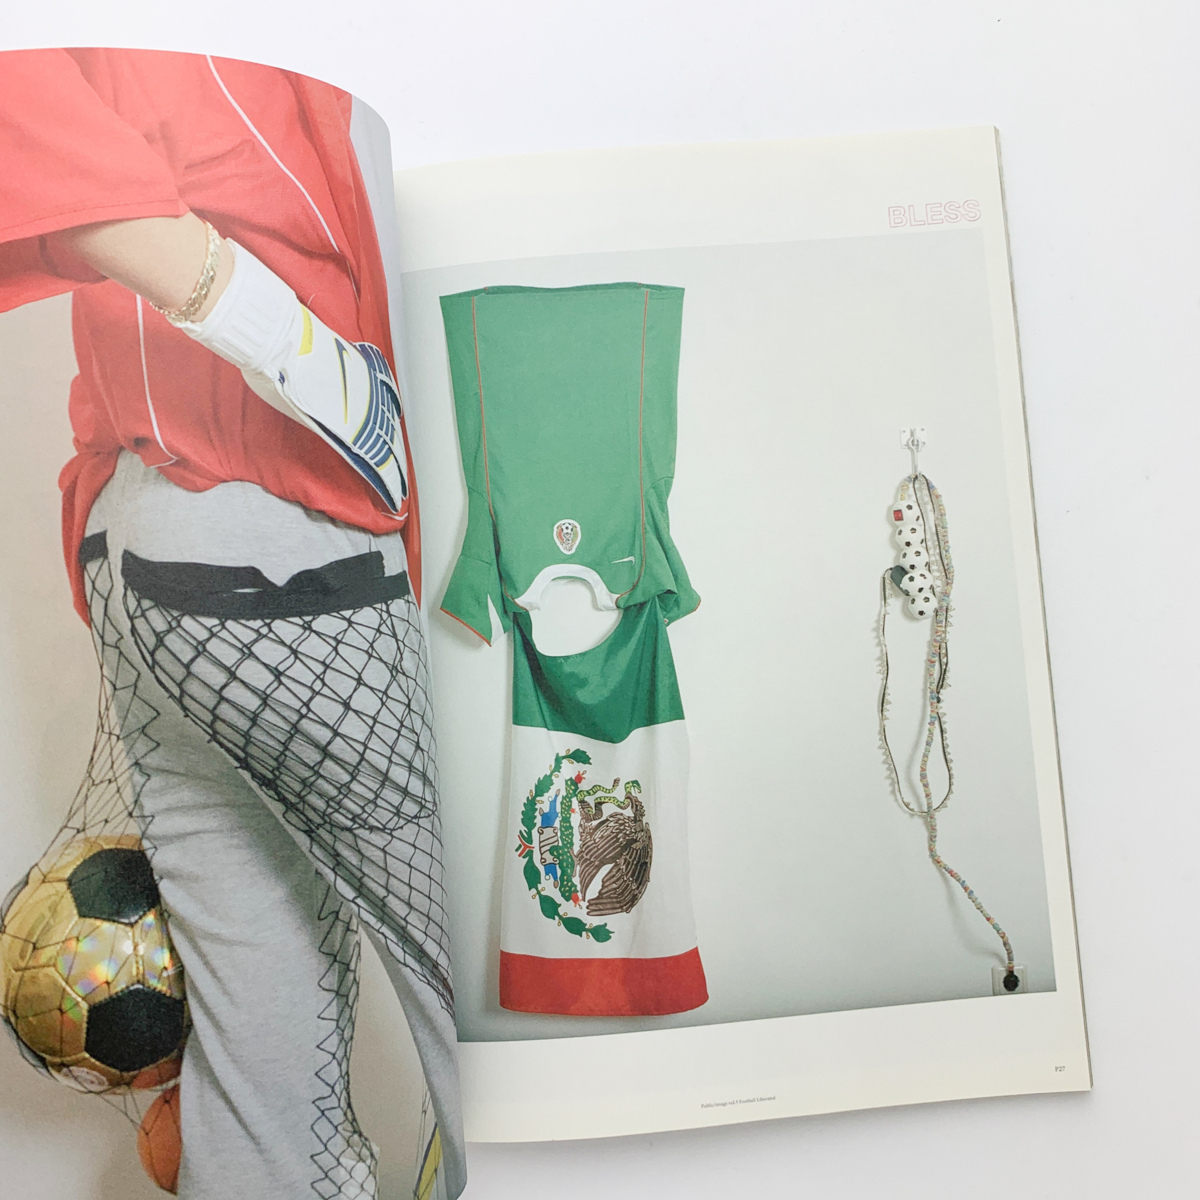 Public/Image. magazine vol.3　FOOTBALL LIBERATED Issue　2006年　＜ゆうメール＞_画像6